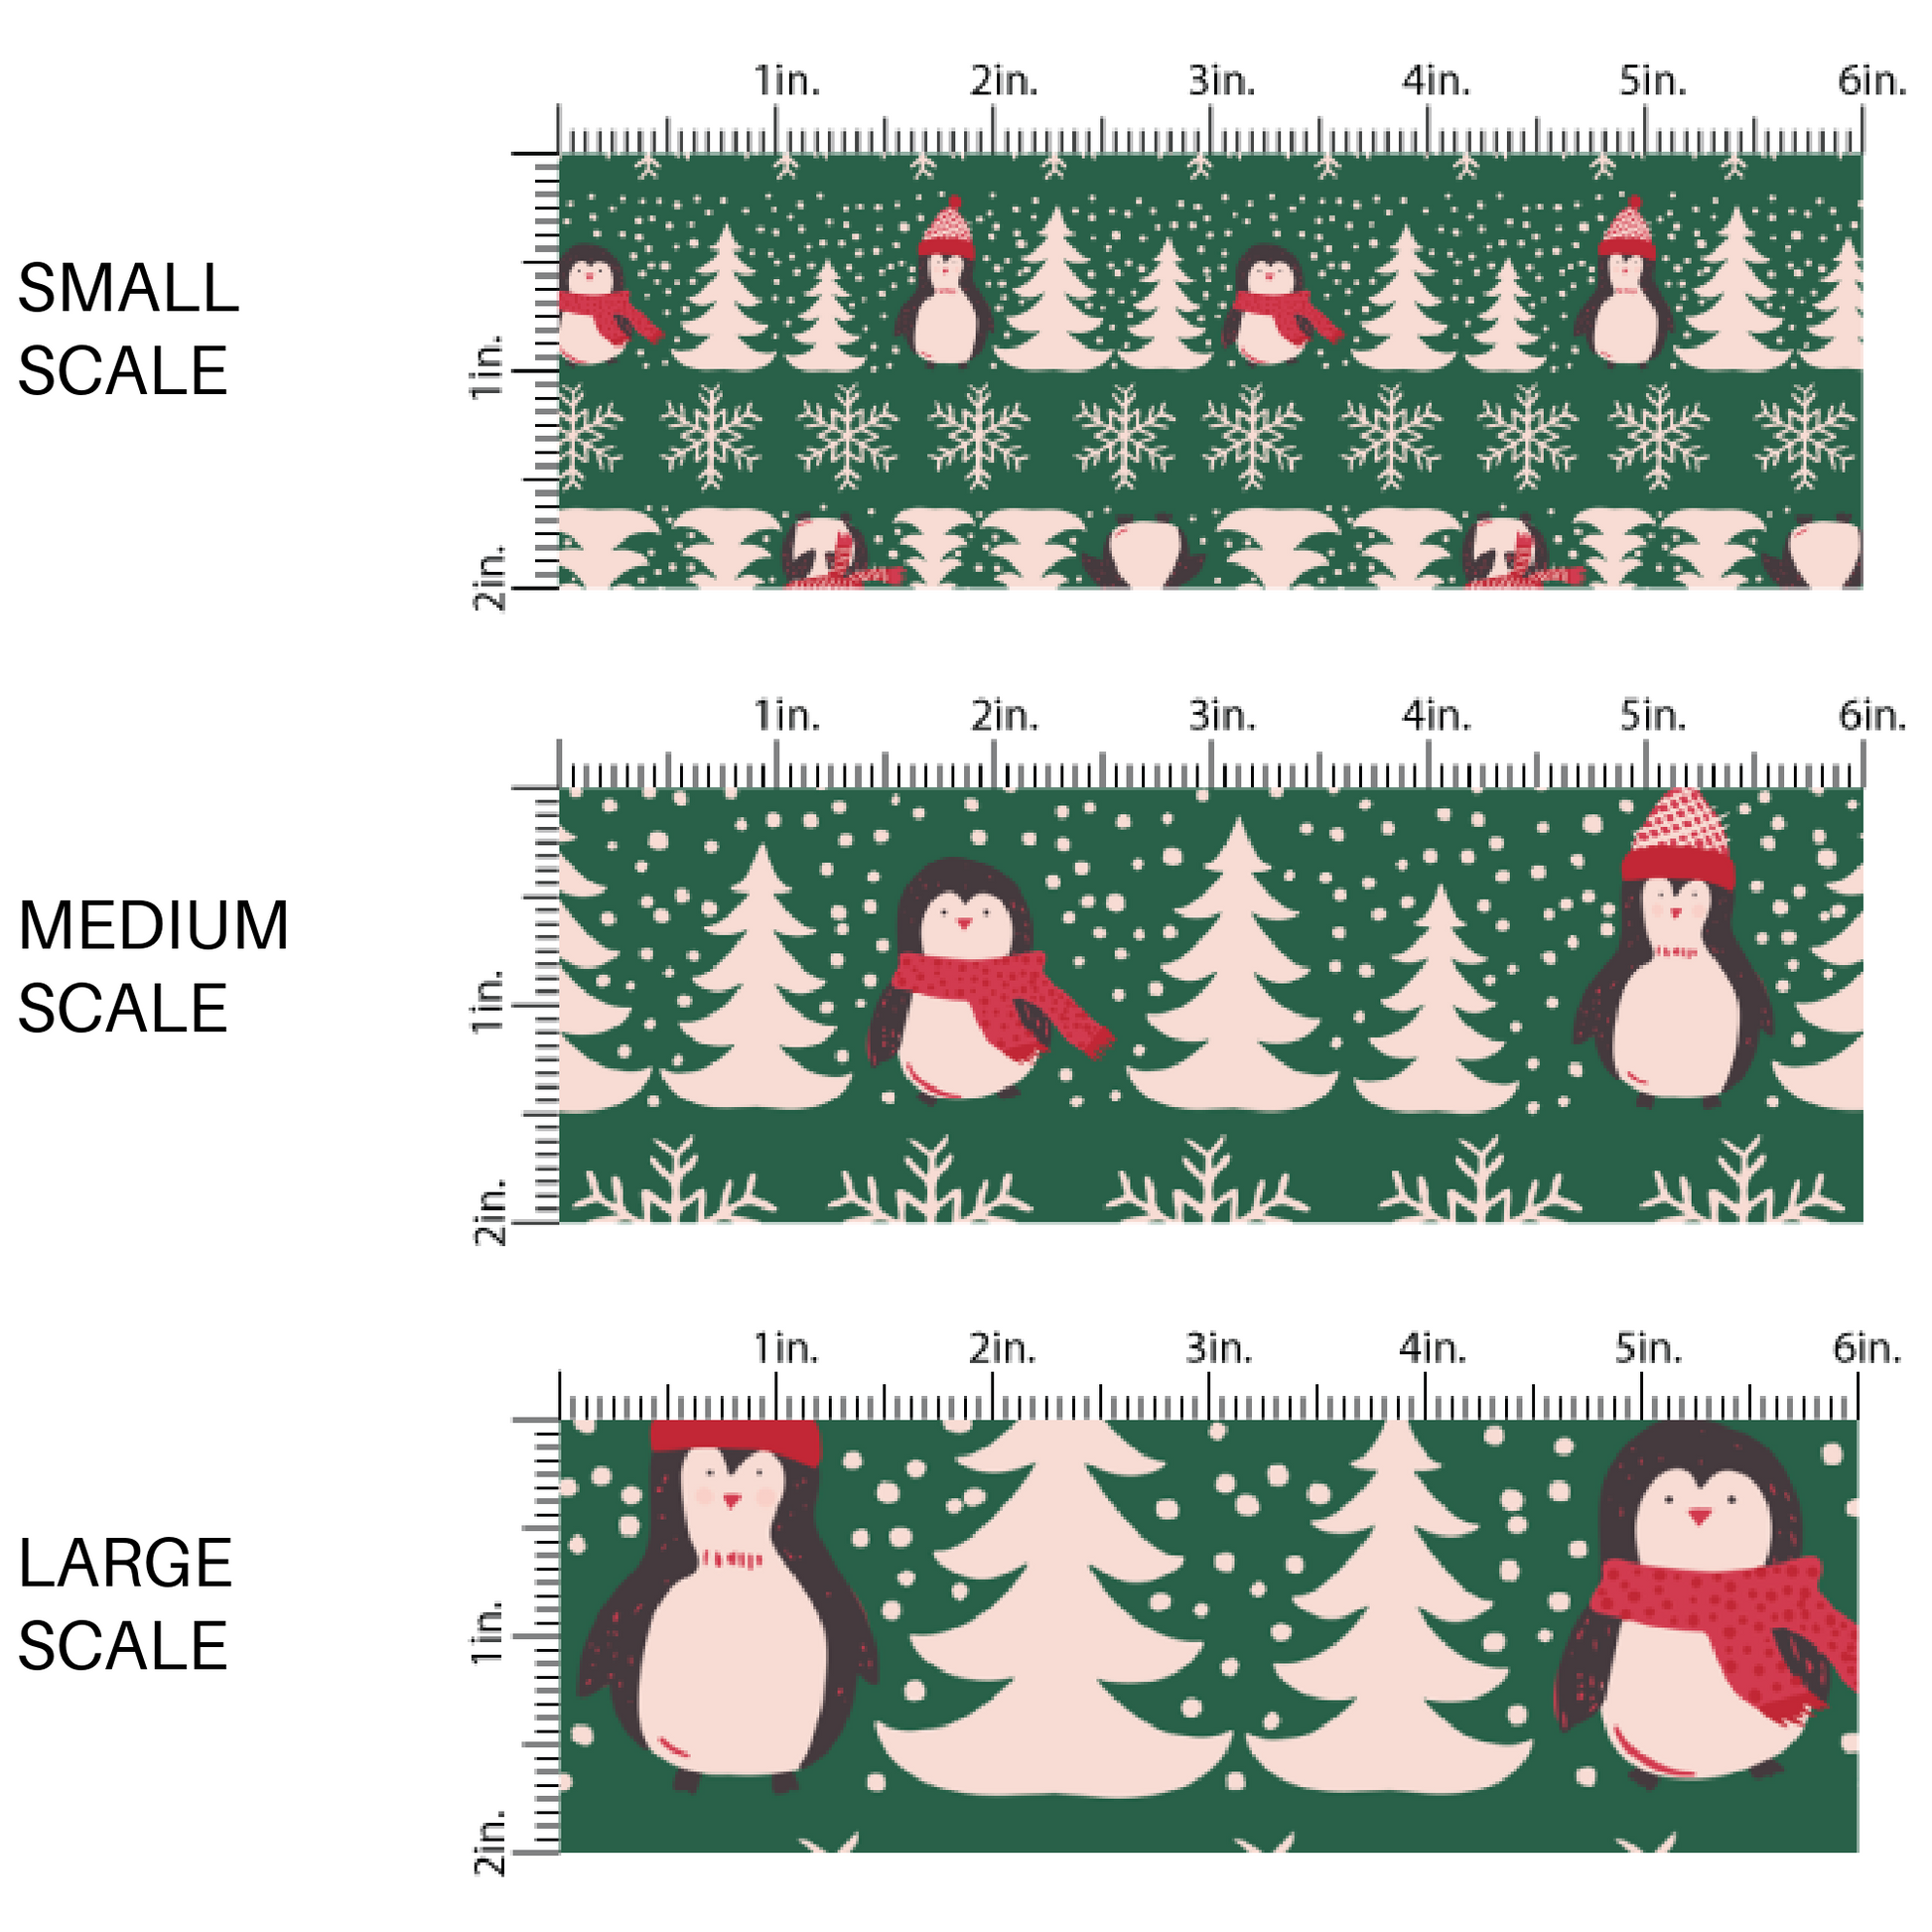 This scale chart of small scale, medium scale, and large scale of these holiday pattern themed fabric by the yard features penguins with scarves and hats surrounded by pine trees and snowflakes on green. This fun Christmas fabric can be used for all your sewing and crafting needs!